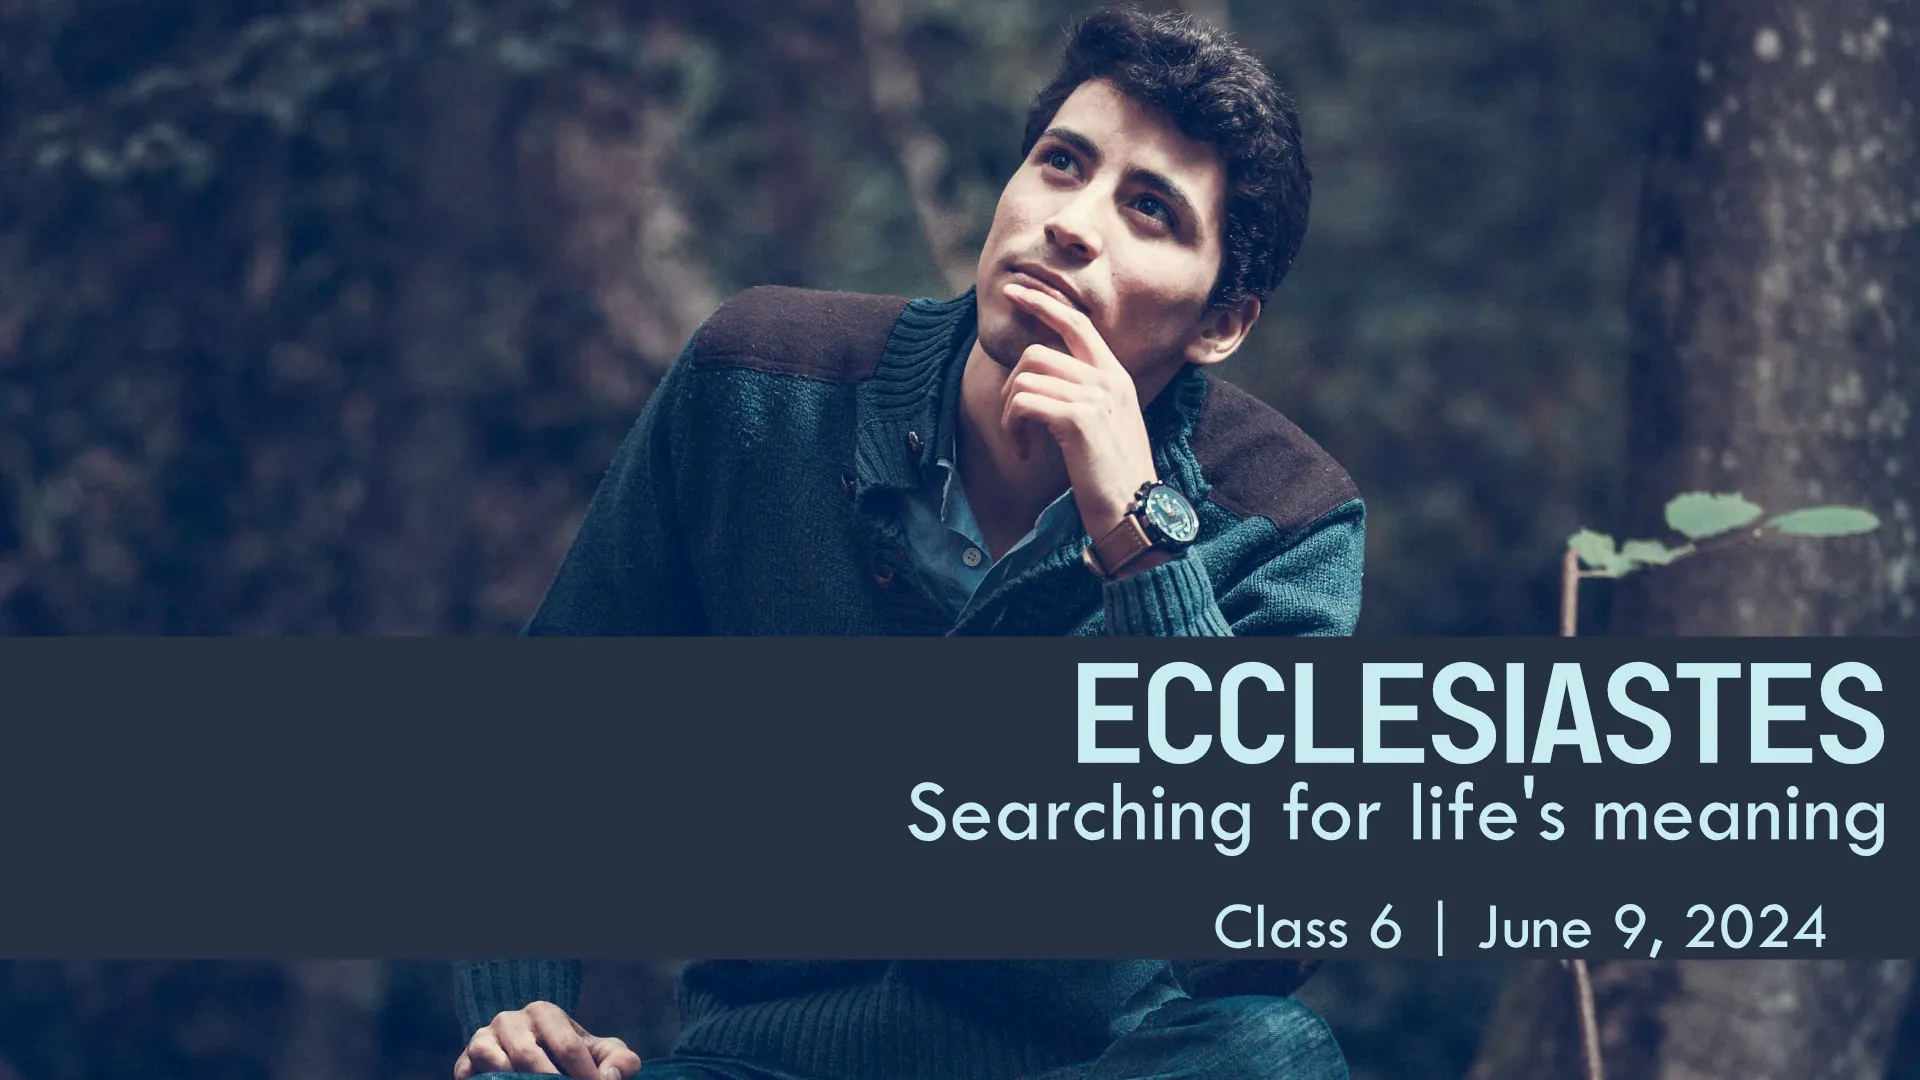 Ecclesiastes: Searching for life's meaning | Class 6